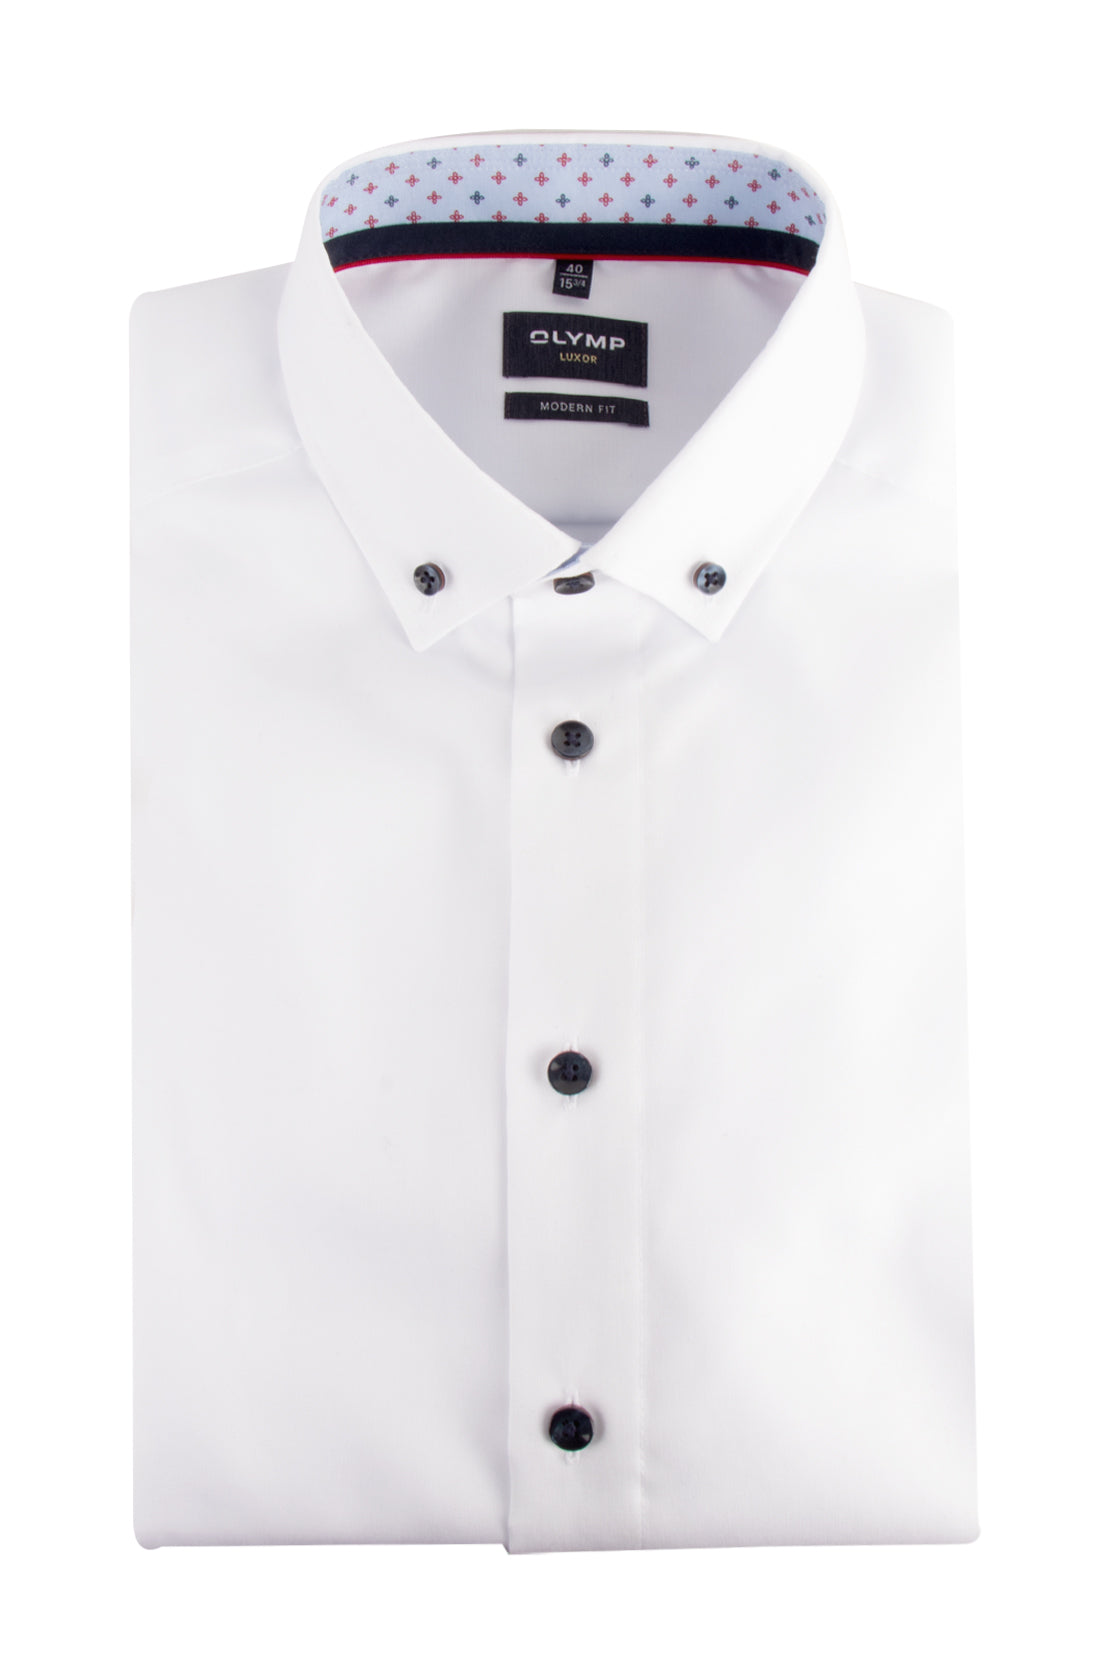 Olymp Luxor Mod Fit LS Shirt White